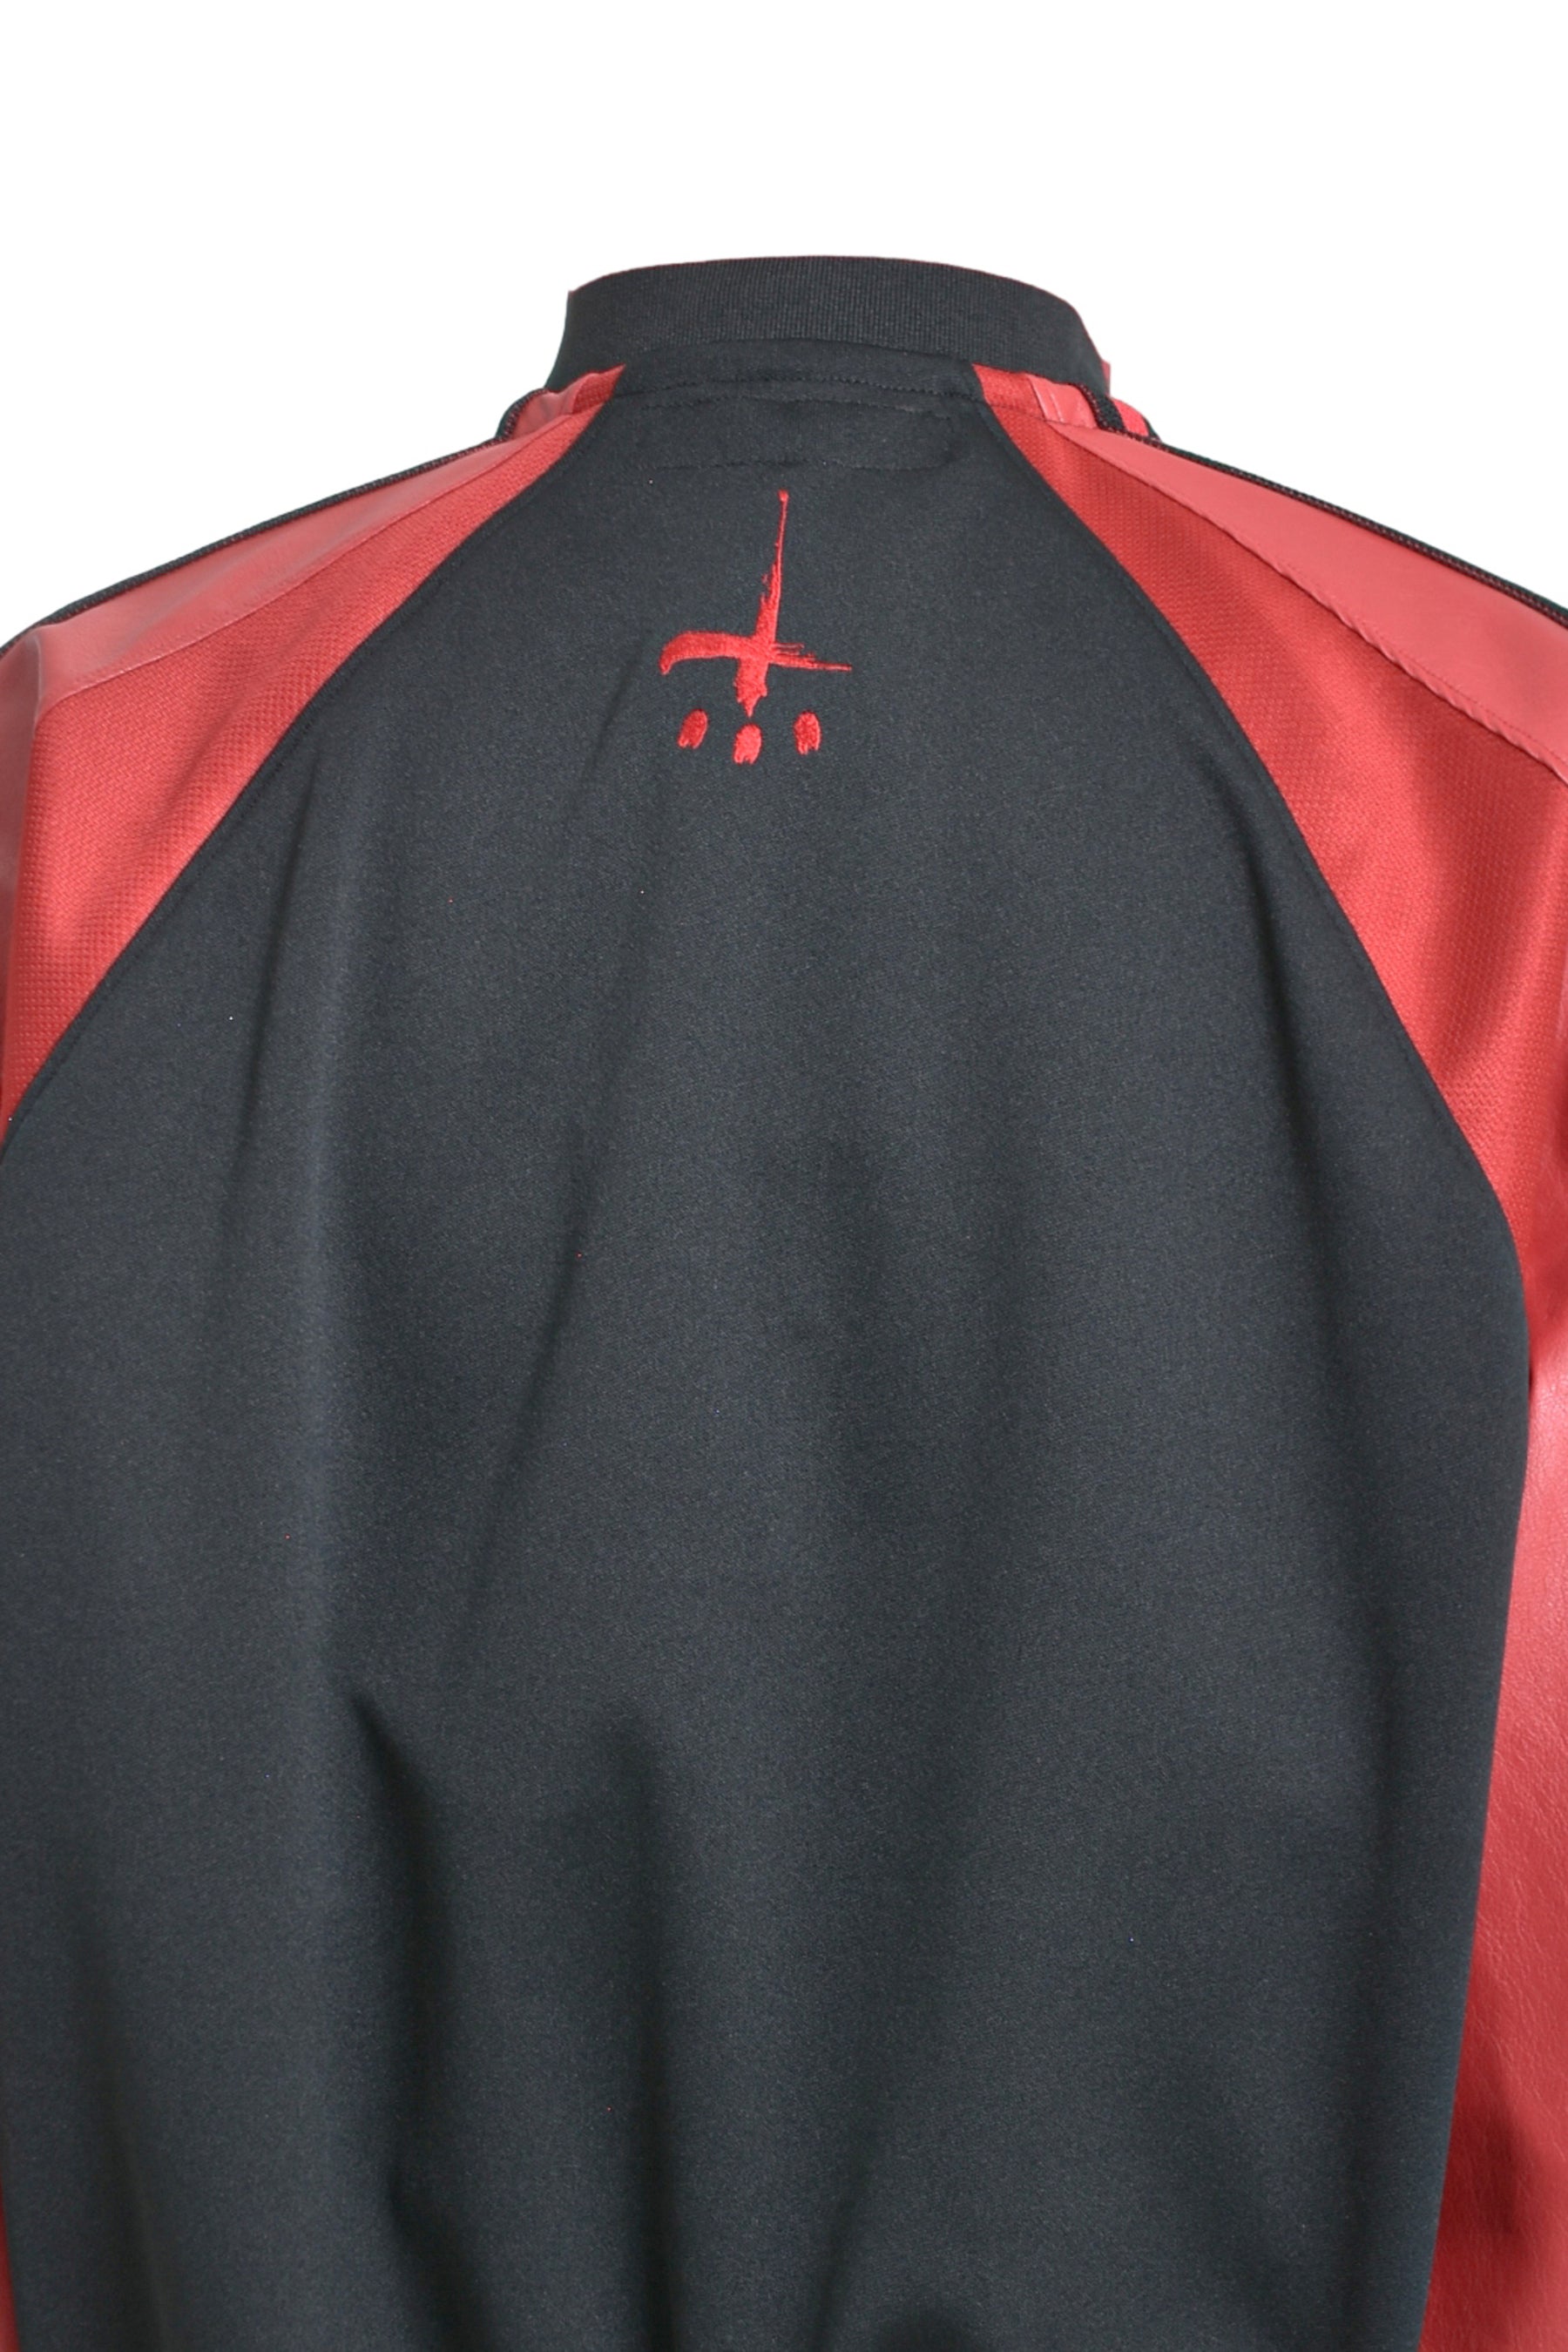 KEEP OUT TRACK JACKET CTLS VER. / BLK RED